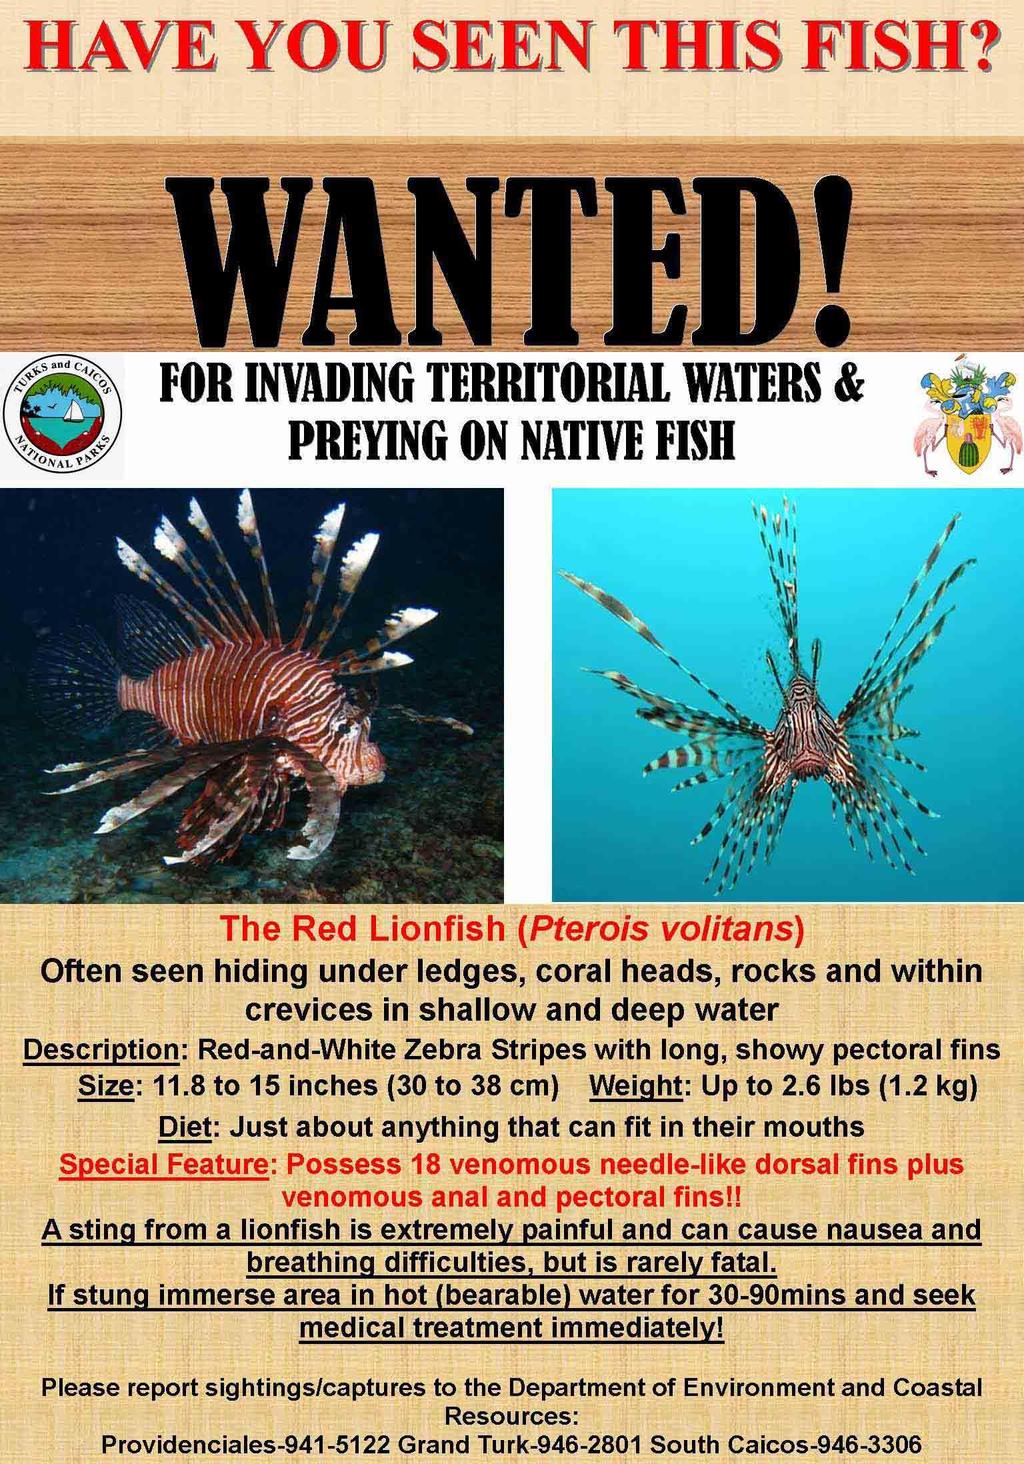 Invasive Species these species thrive in their new habitat, usually due to lack of natural predators to control their population do damage mainly by consuming native species, competing with